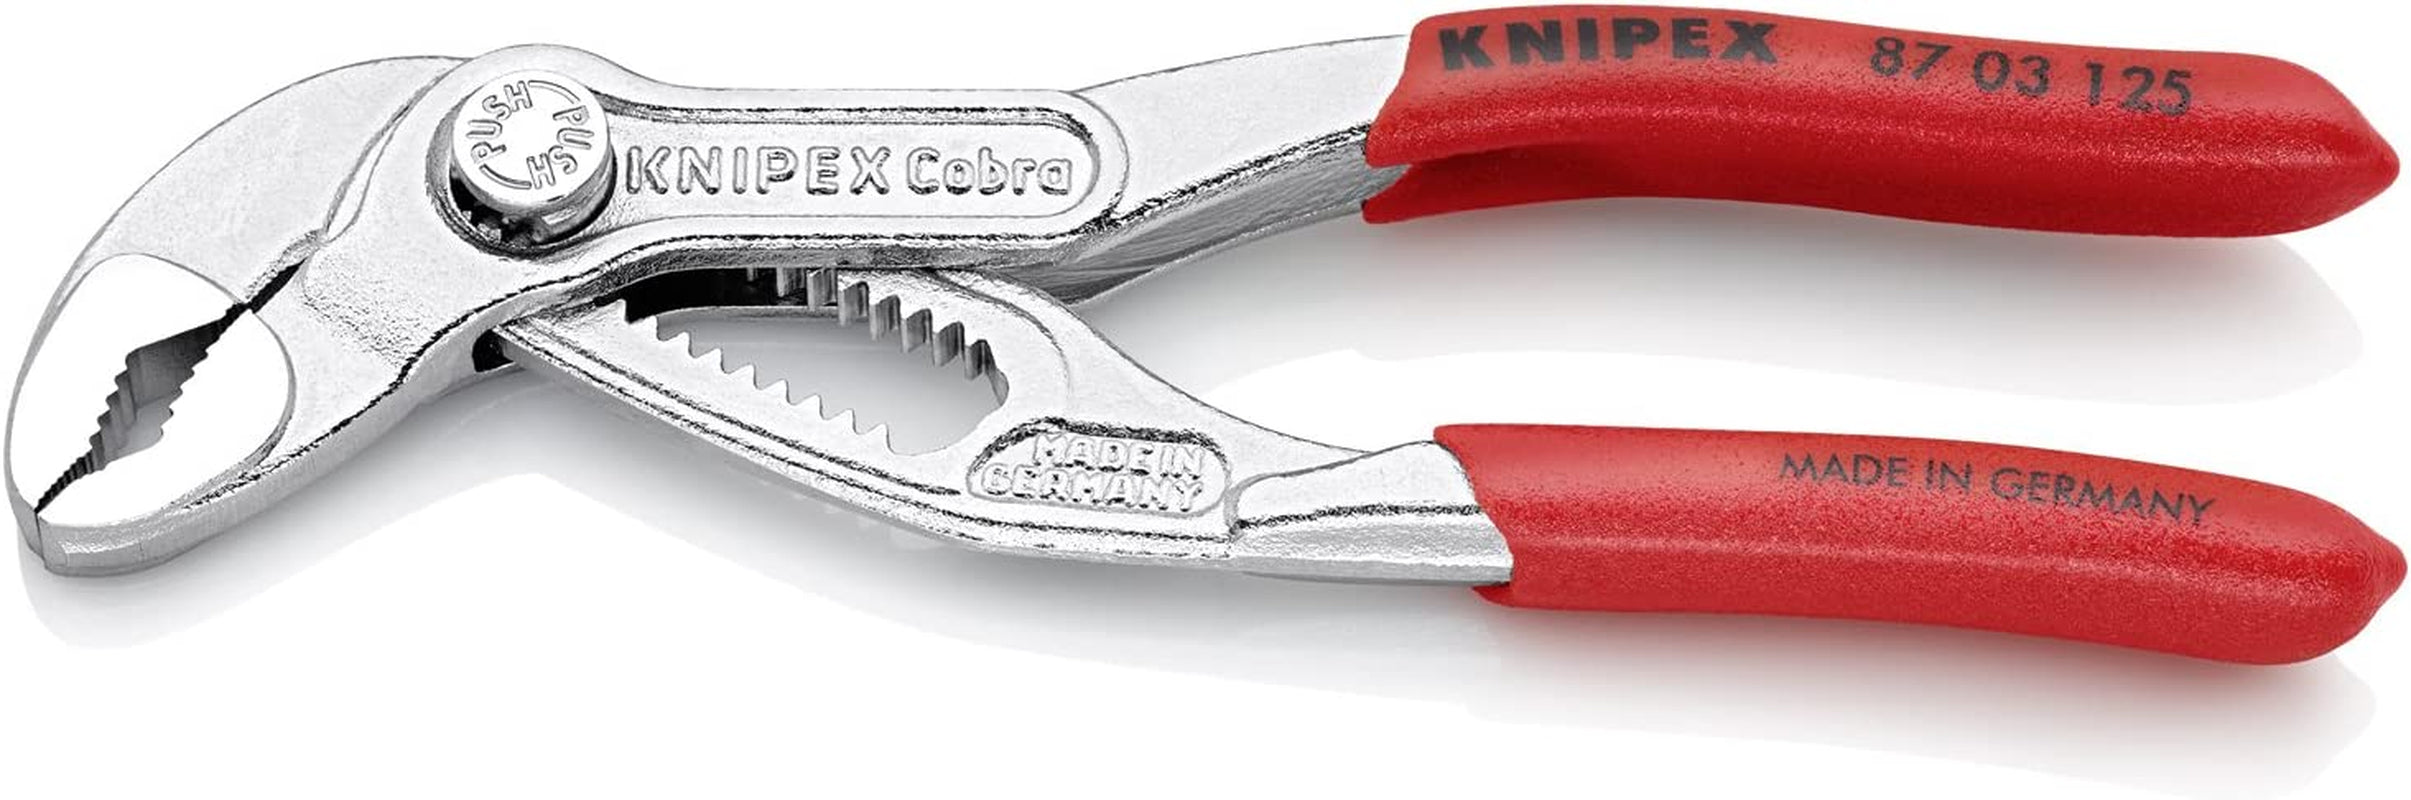 KNIPEX, Knipex 87 03 125 Cobra High-Tech Water Pump Pliers Chrome Plated with Non-Slip Plastic Coating, 125 Mm